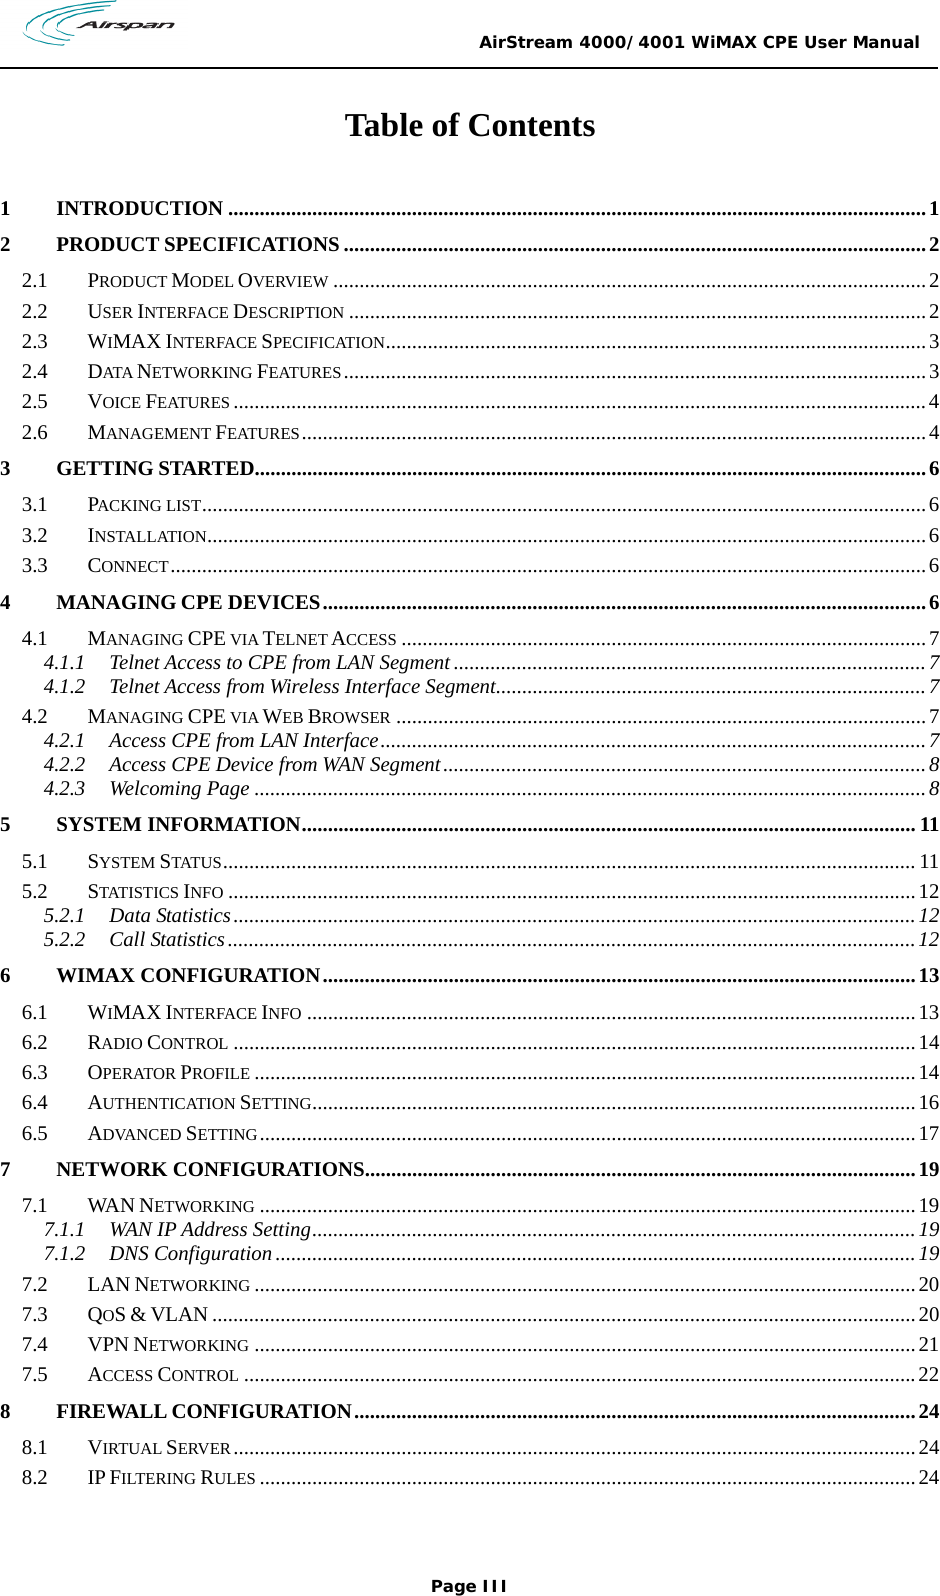                                                 AirStream 4000/4001 WiMAX CPE User Manual Page III  Table of Contents  1 INTRODUCTION .....................................................................................................................................1 2 PRODUCT SPECIFICATIONS ...............................................................................................................2 2.1 PRODUCT MODEL OVERVIEW .................................................................................................................2 2.2 USER INTERFACE DESCRIPTION ..............................................................................................................2 2.3 WIMAX INTERFACE SPECIFICATION.......................................................................................................3 2.4 DATA  NETWORKING FEATURES...............................................................................................................3 2.5 VOICE FEATURES ....................................................................................................................................4 2.6 MANAGEMENT FEATURES.......................................................................................................................4 3 GETTING STARTED................................................................................................................................6 3.1 PACKING LIST..........................................................................................................................................6 3.2 INSTALLATION.........................................................................................................................................6 3.3 CONNECT................................................................................................................................................6 4 MANAGING CPE DEVICES...................................................................................................................6 4.1 MANAGING CPE VIA TELNET ACCESS ....................................................................................................7 4.1.1 Telnet Access to CPE from LAN Segment ..........................................................................................7 4.1.2 Telnet Access from Wireless Interface Segment..................................................................................7 4.2 MANAGING CPE VIA WEB BROWSER .....................................................................................................7 4.2.1 Access CPE from LAN Interface........................................................................................................7 4.2.2 Access CPE Device from WAN Segment............................................................................................8 4.2.3 Welcoming Page ................................................................................................................................8 5 SYSTEM INFORMATION..................................................................................................................... 11 5.1 SYSTEM STATUS.................................................................................................................................... 11 5.2 STATISTICS INFO ...................................................................................................................................12 5.2.1 Data Statistics..................................................................................................................................12 5.2.2 Call Statistics...................................................................................................................................12 6 WIMAX CONFIGURATION.................................................................................................................13 6.1 WIMAX INTERFACE INFO ....................................................................................................................13 6.2 RADIO CONTROL ..................................................................................................................................14 6.3 OPERATOR PROFILE ..............................................................................................................................14 6.4 AUTHENTICATION SETTING...................................................................................................................16 6.5 ADVANCED SETTING.............................................................................................................................17 7 NETWORK CONFIGURATIONS.........................................................................................................19 7.1 WAN NETWORKING .............................................................................................................................19 7.1.1 WAN IP Address Setting...................................................................................................................19 7.1.2 DNS Configuration..........................................................................................................................19 7.2 LAN NETWORKING ..............................................................................................................................20 7.3 QOS &amp; VLAN ......................................................................................................................................20 7.4 VPN NETWORKING ..............................................................................................................................21 7.5 ACCESS CONTROL ................................................................................................................................22 8 FIREWALL CONFIGURATION...........................................................................................................24 8.1 VIRTUAL SERVER ..................................................................................................................................24 8.2 IP FILTERING RULES .............................................................................................................................24 